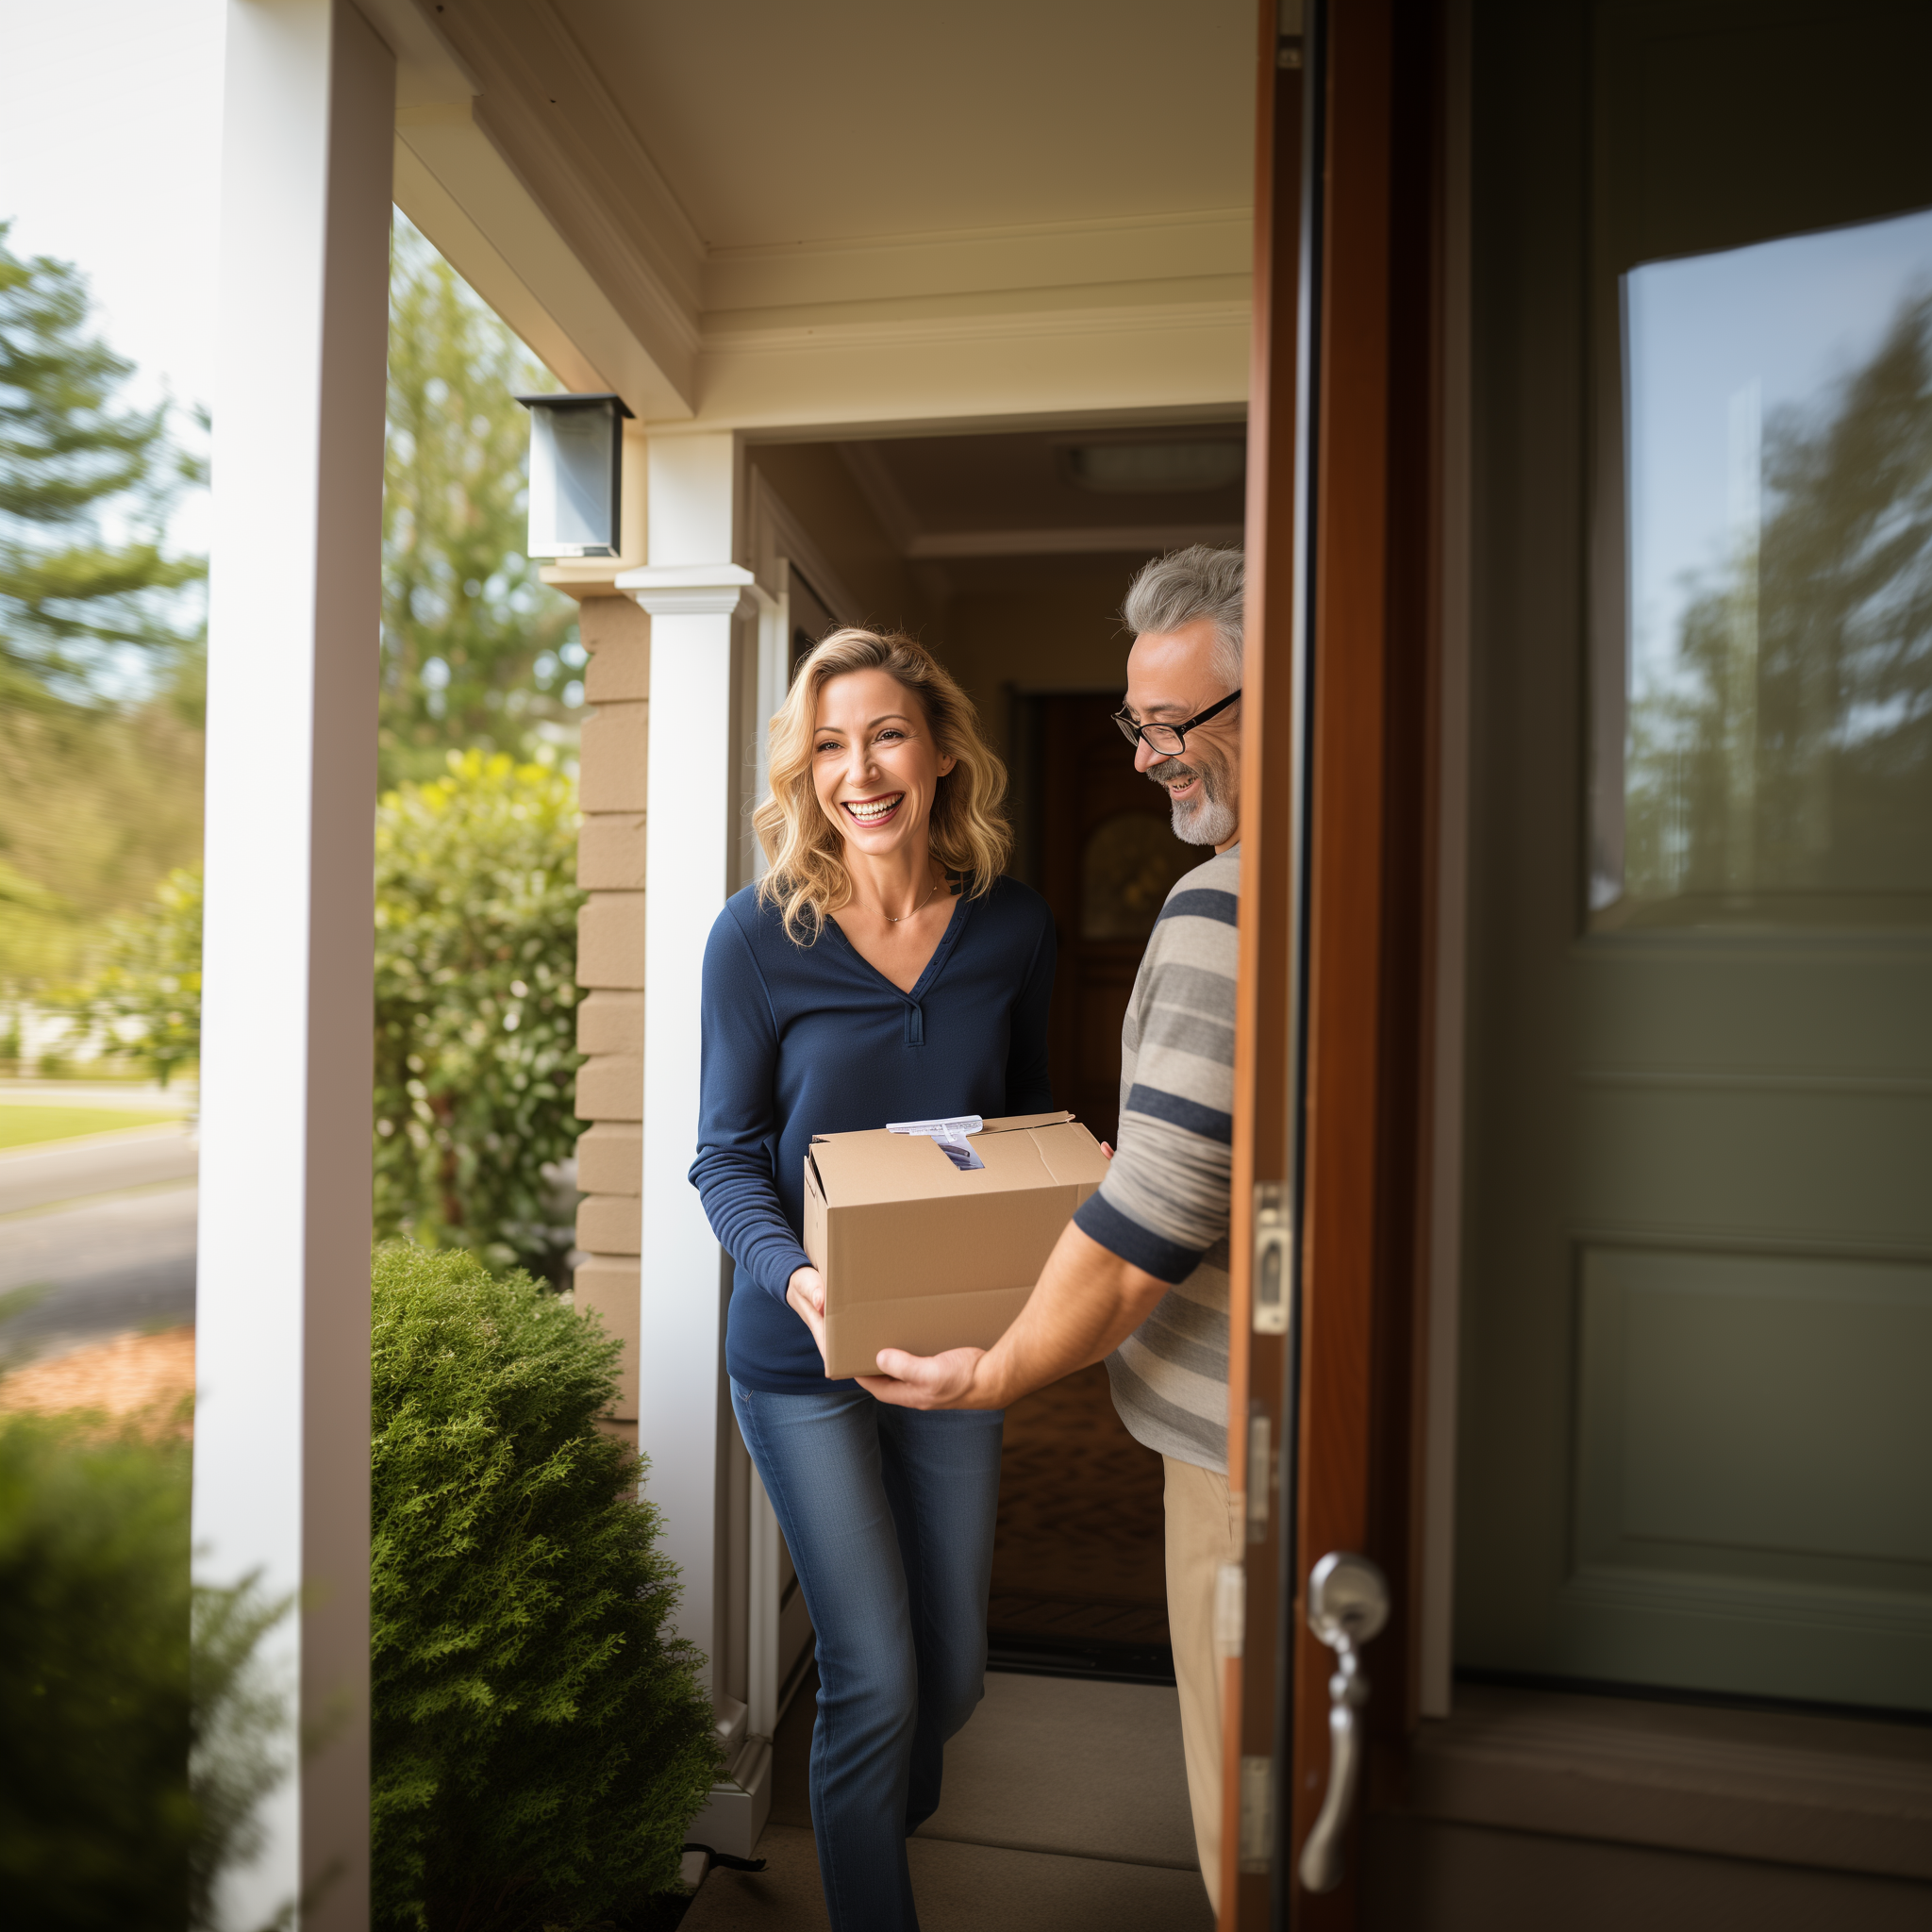 A middle aged man and woman receive a package that was shipped to them.